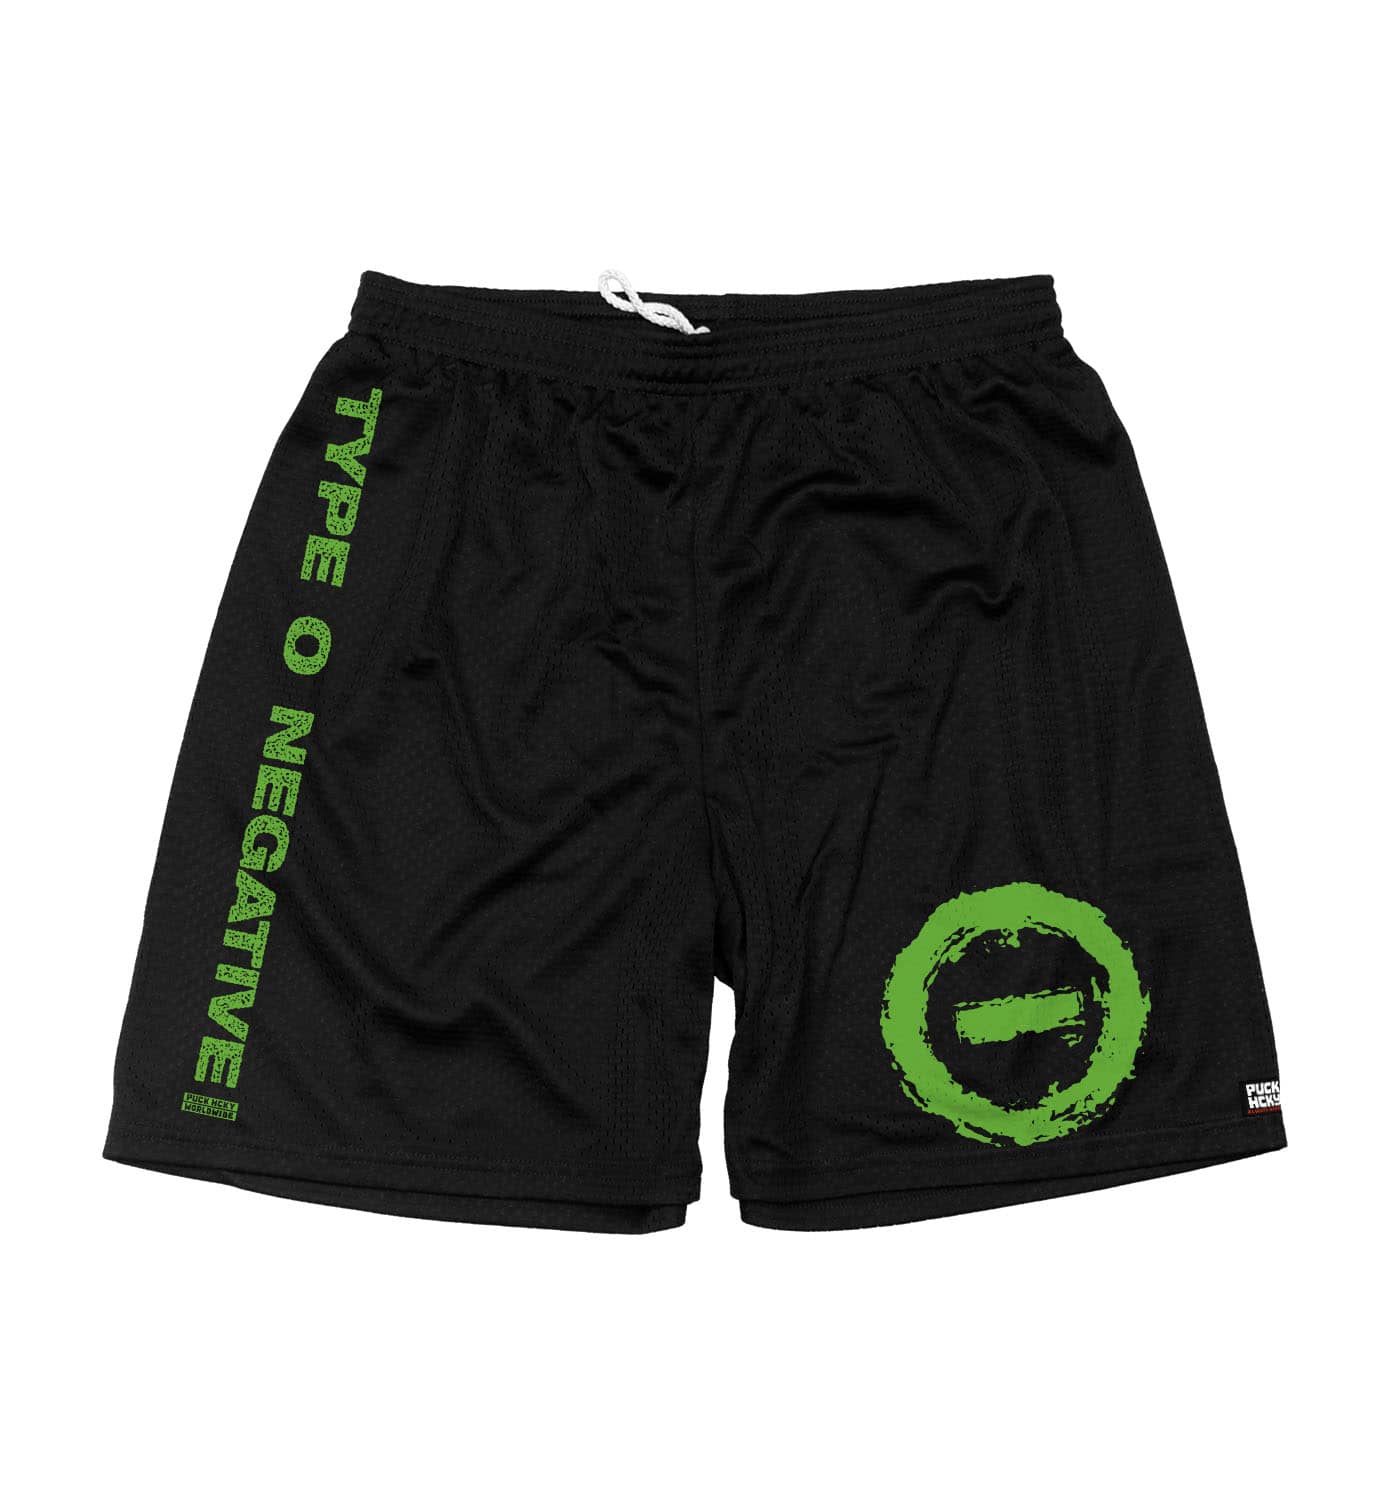 TYPE O NEGATIVE 'THORN' mesh hockey shorts in black front view